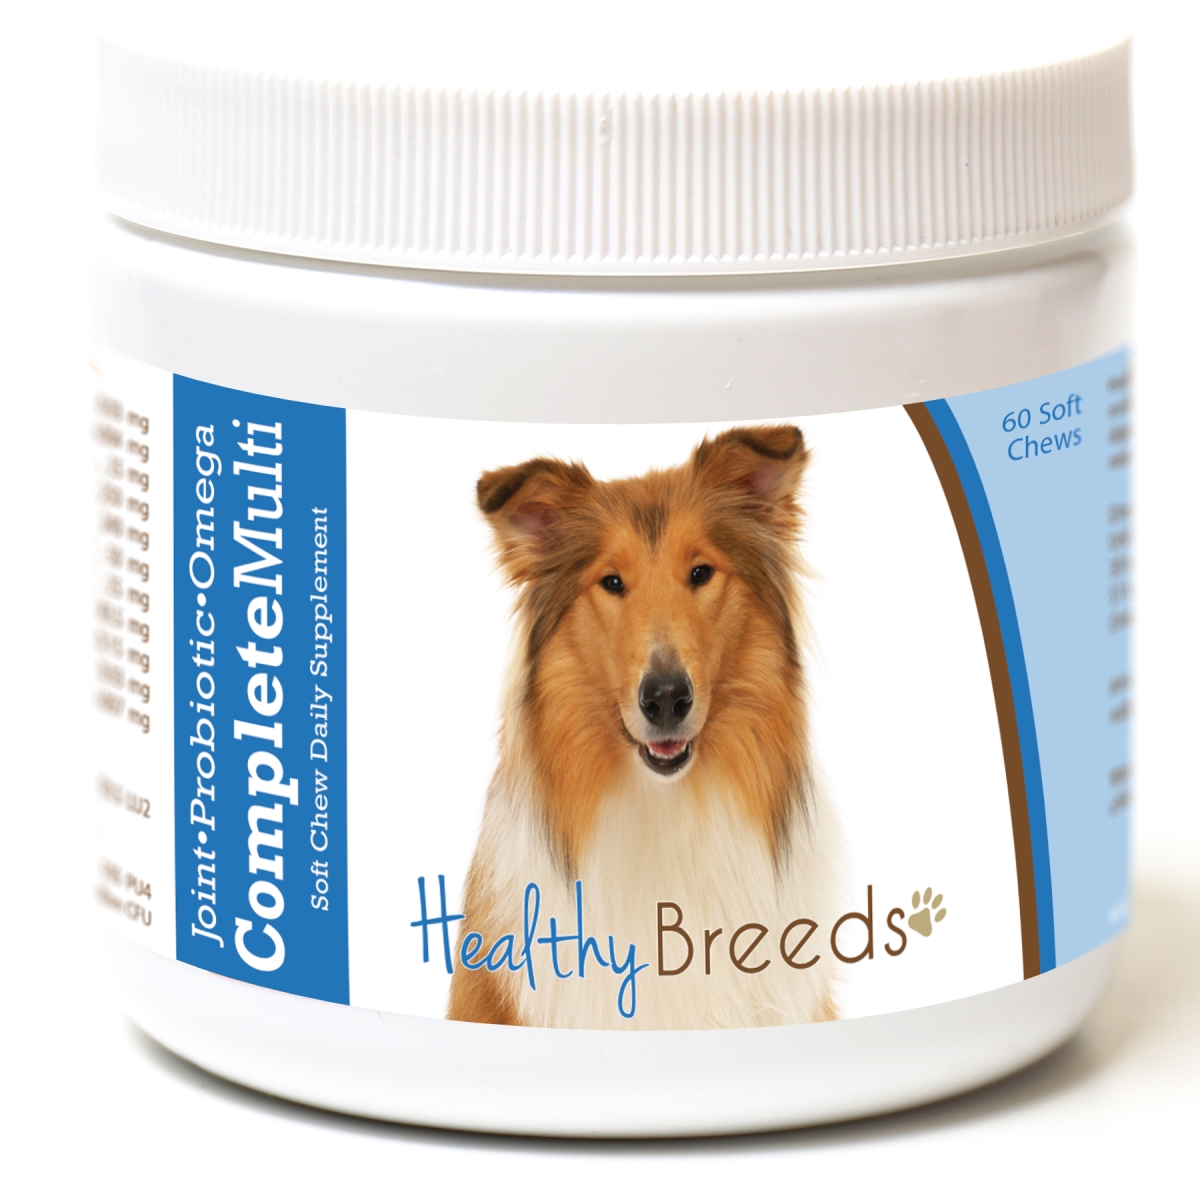 Picture of Healthy Breeds 192959007763 Collie All in One Multivitamin Soft Chew - 60 Count